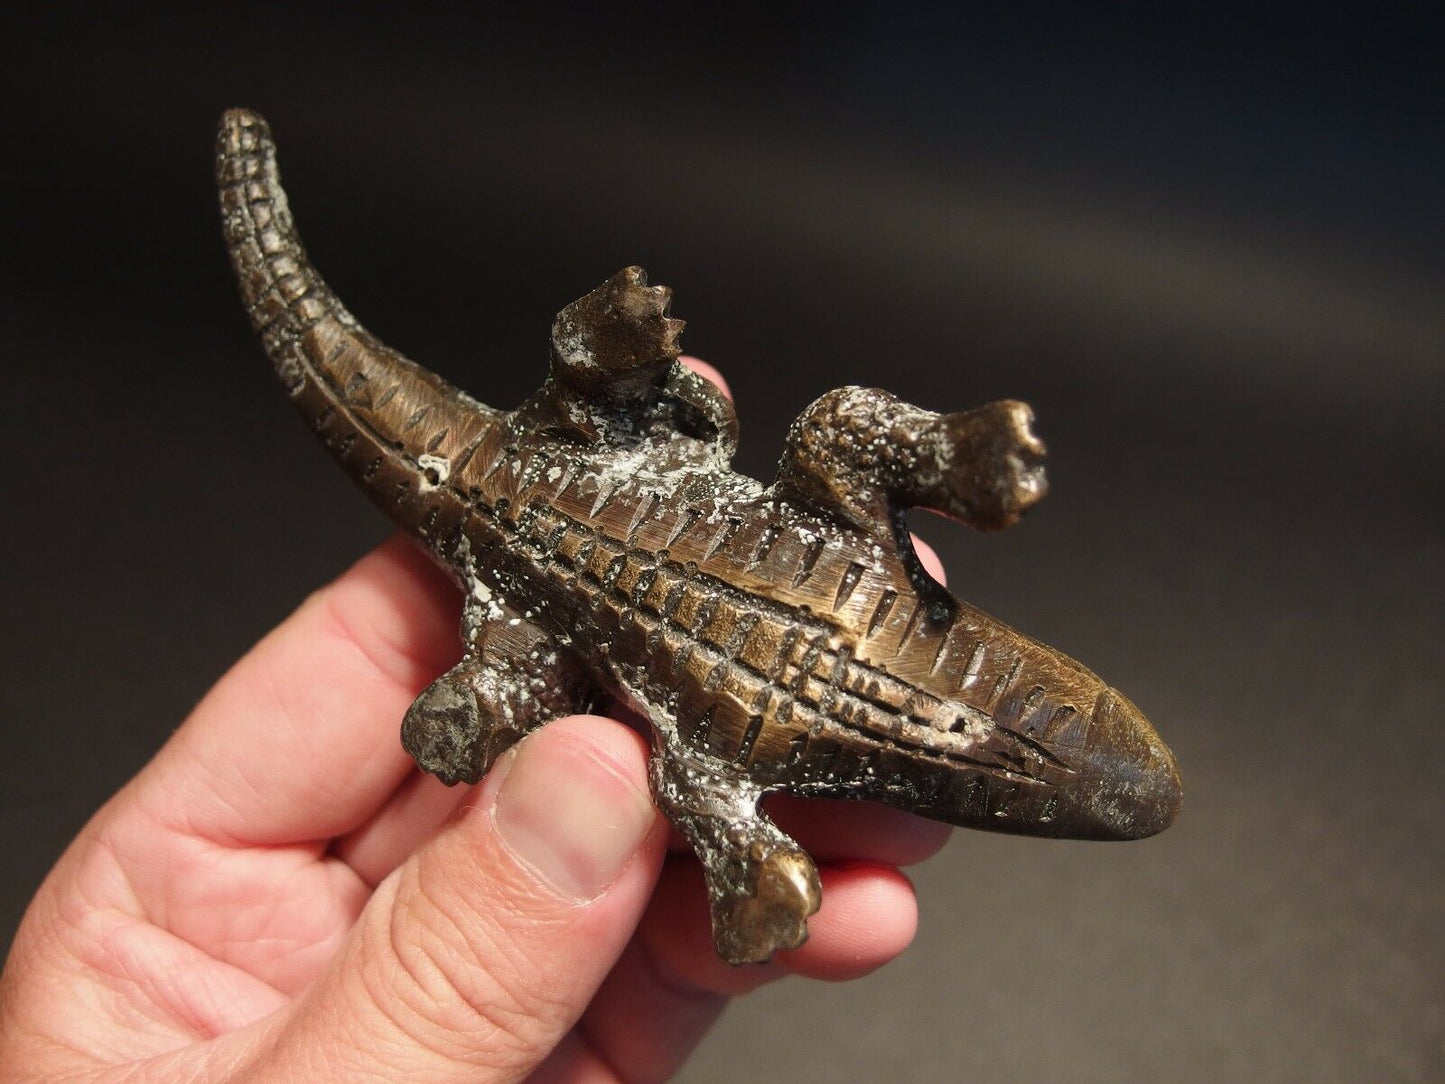 5" Vintage Antique Style Brass Gator Alligator Paperweight Desk Figure - Early Home Decor